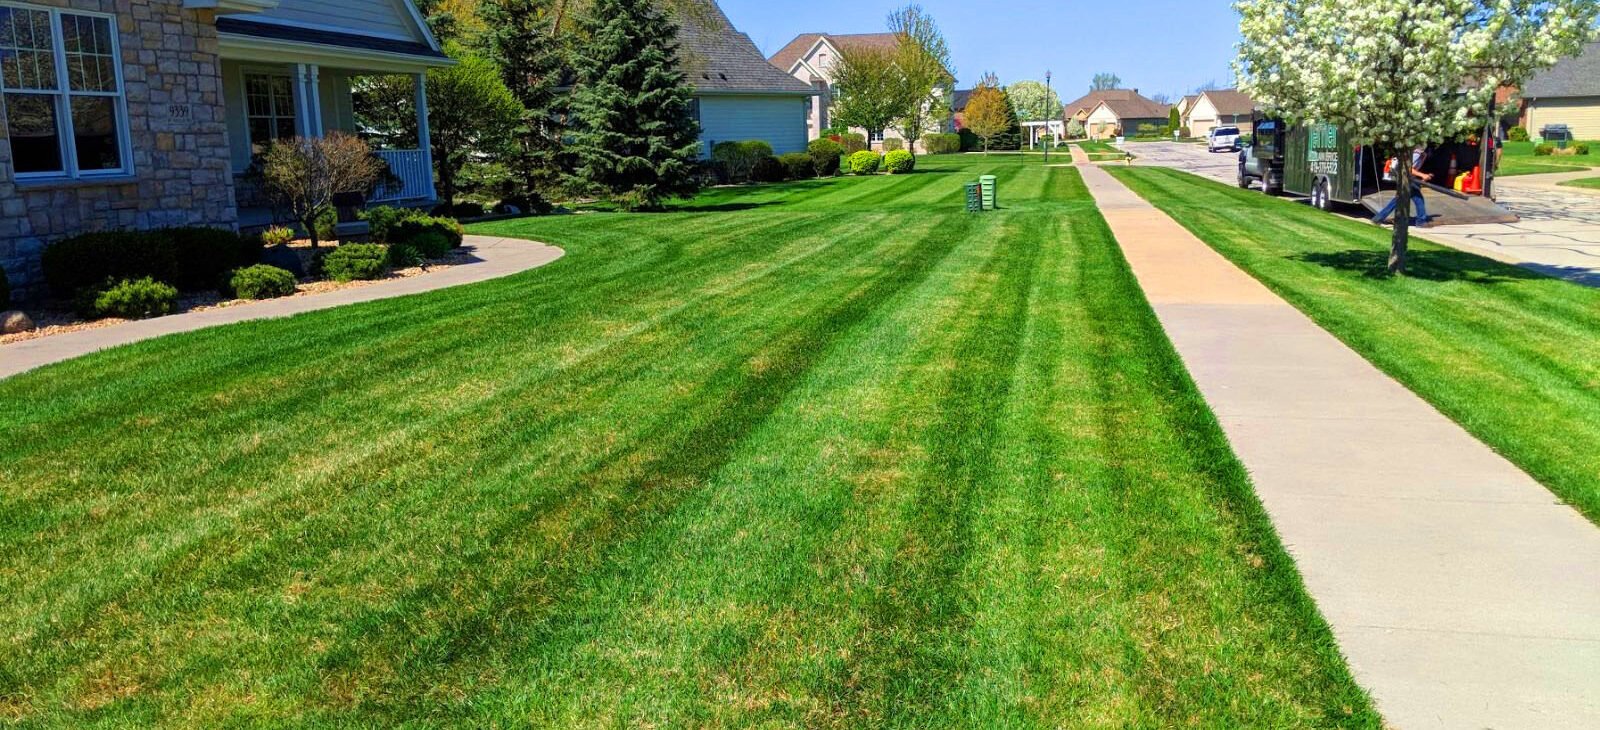 The Grass Is Always Greener 
With Leffler Lawn Service